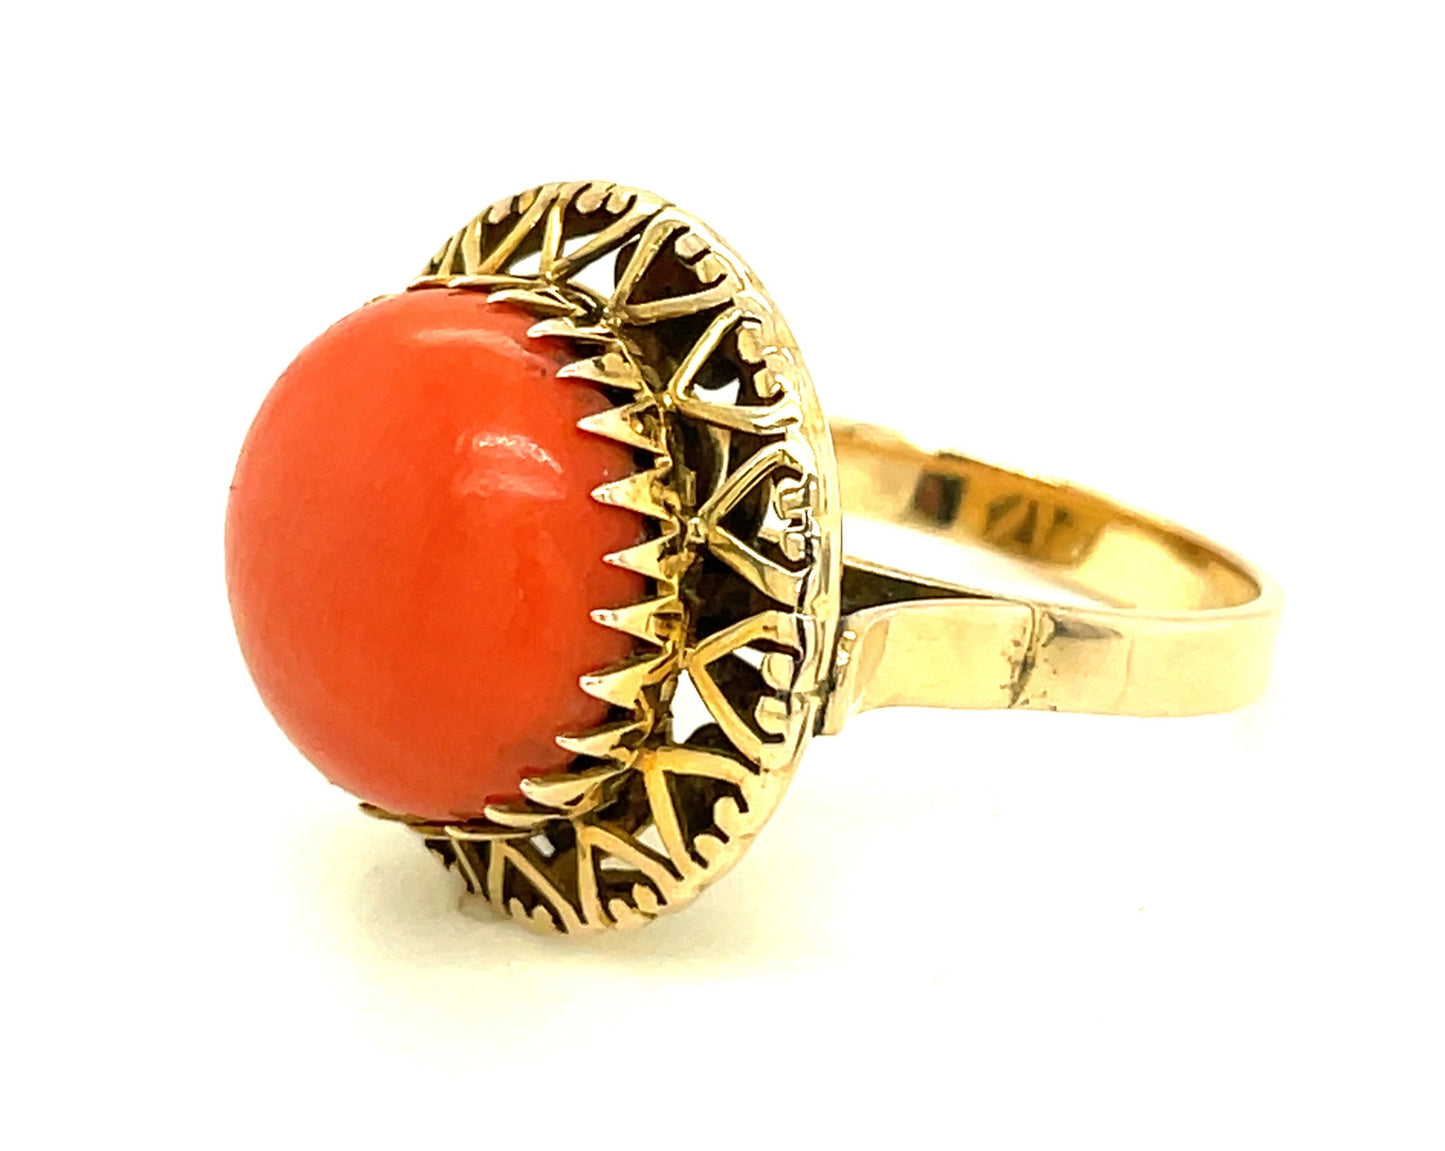 Vintage 14k Yellow Gold and Coral Filigree Ring Size 7 1/2